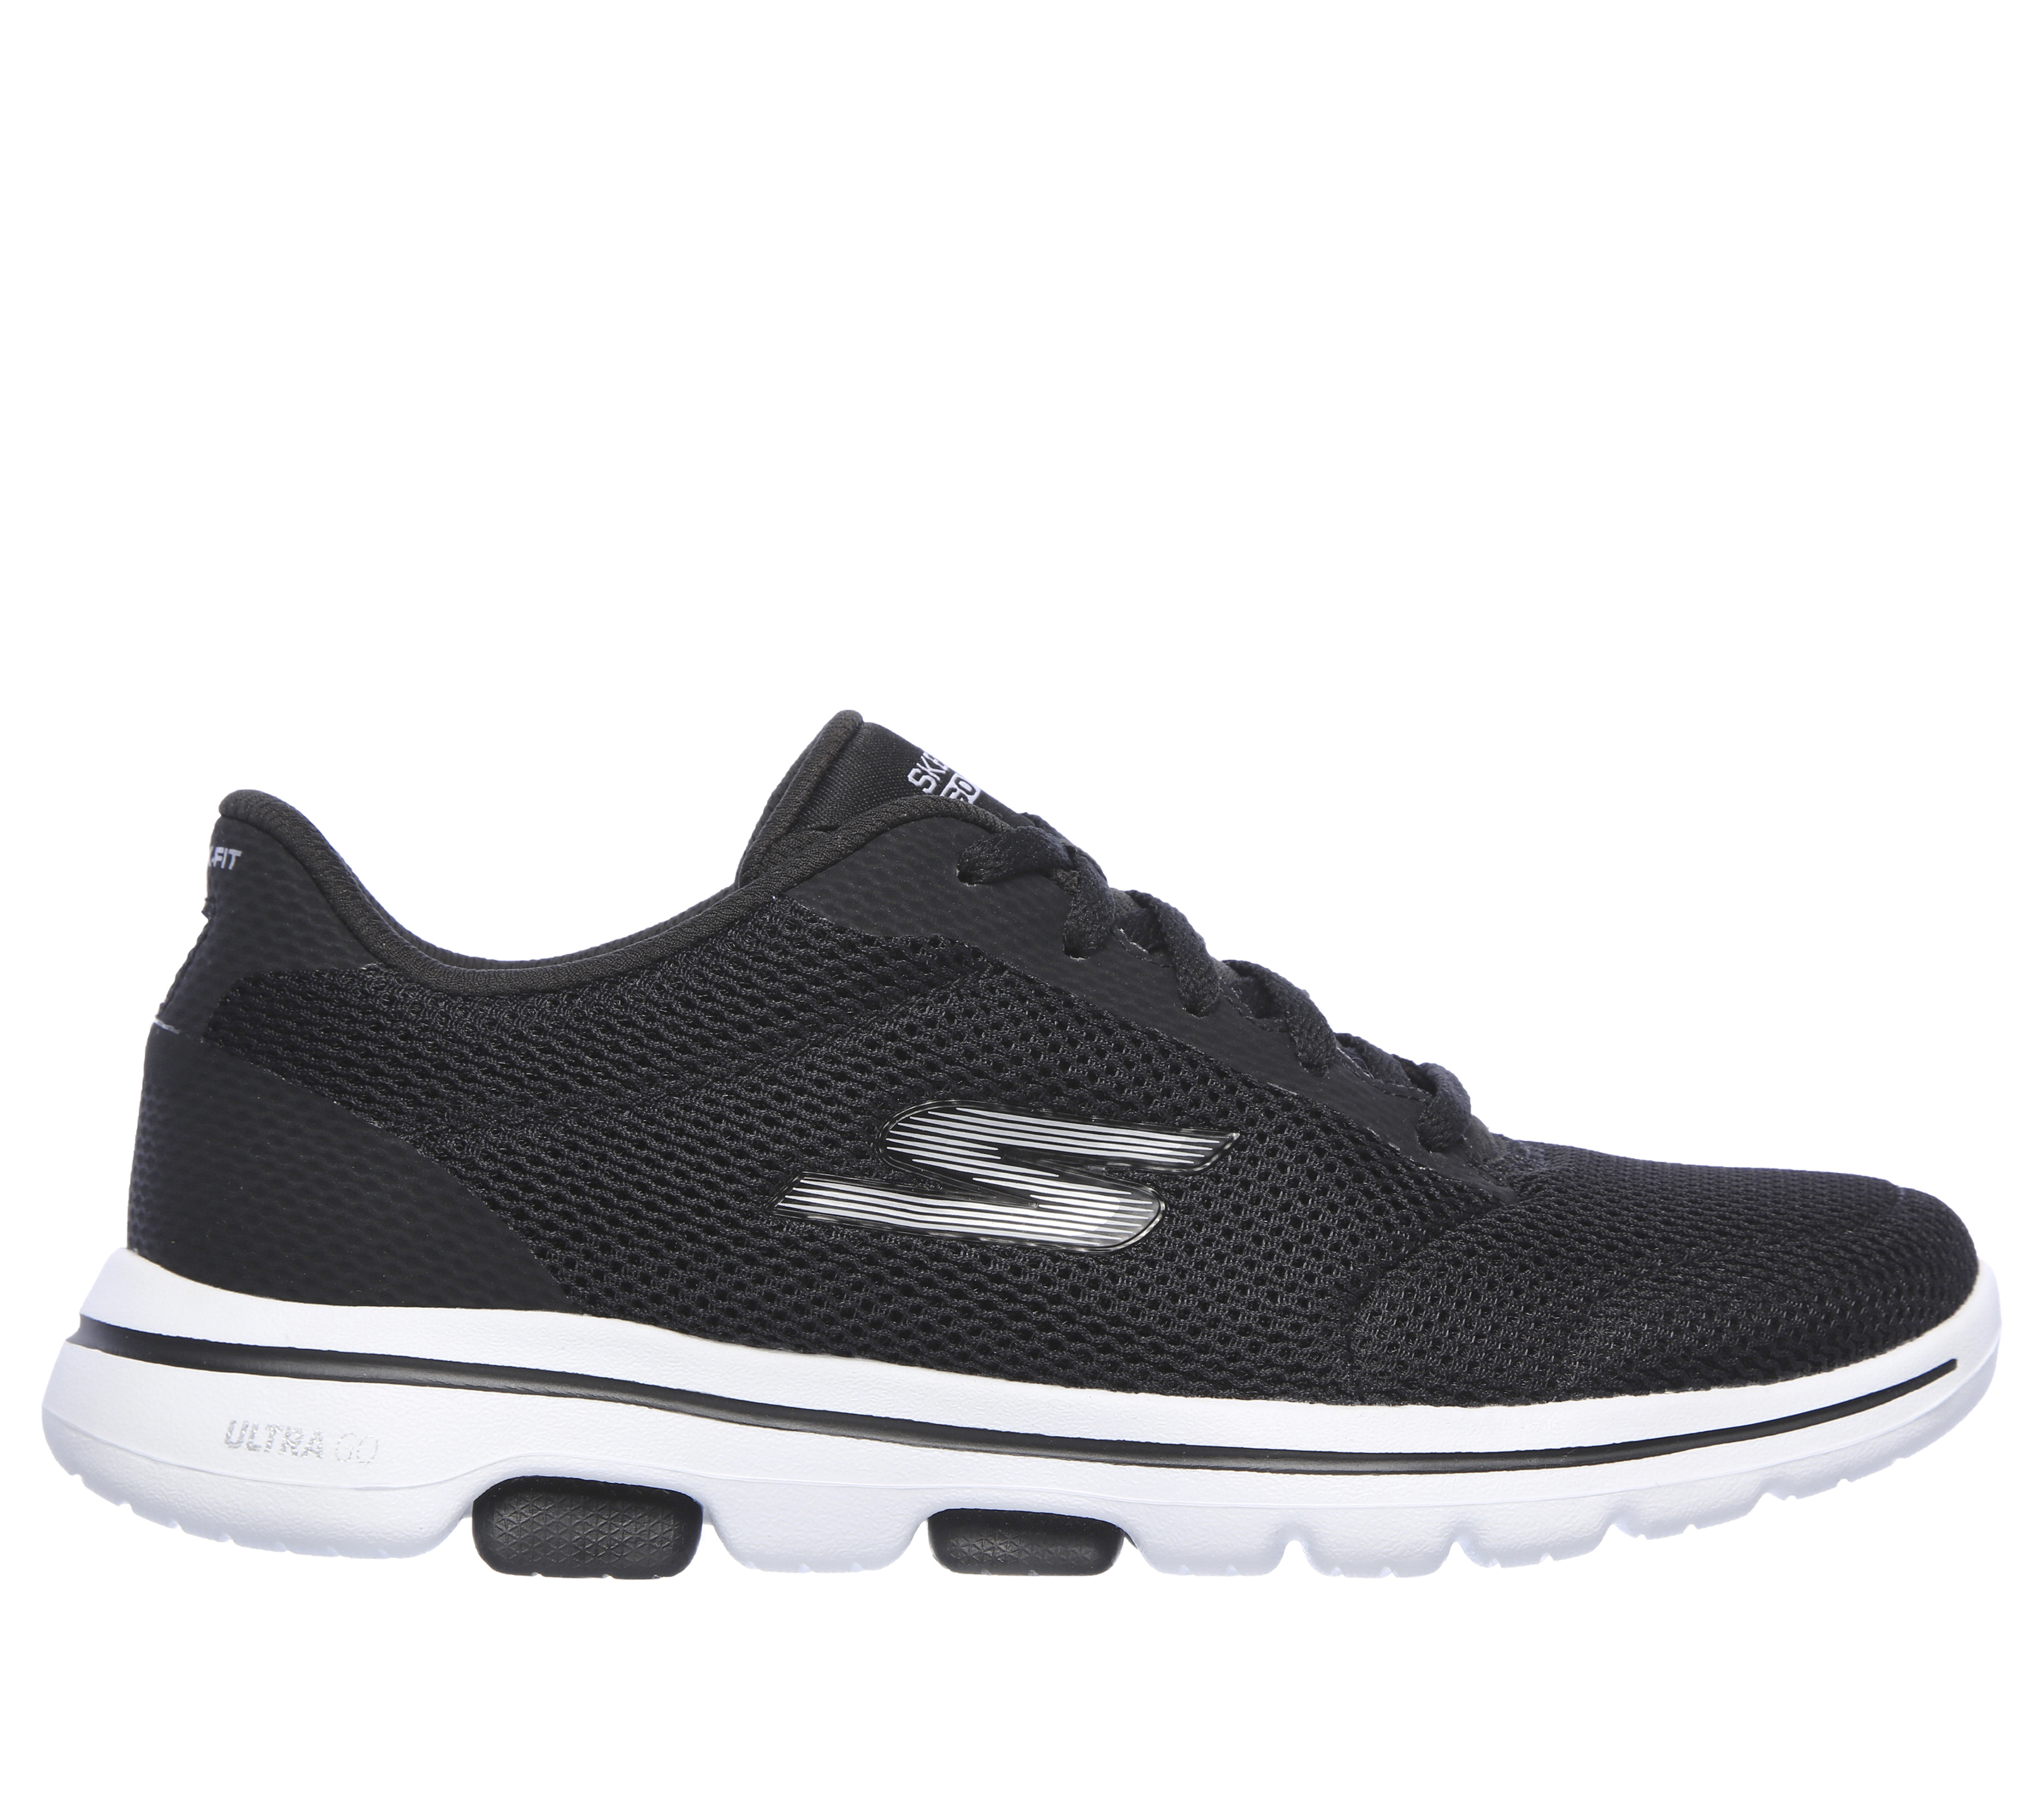 skechers on the go rookie